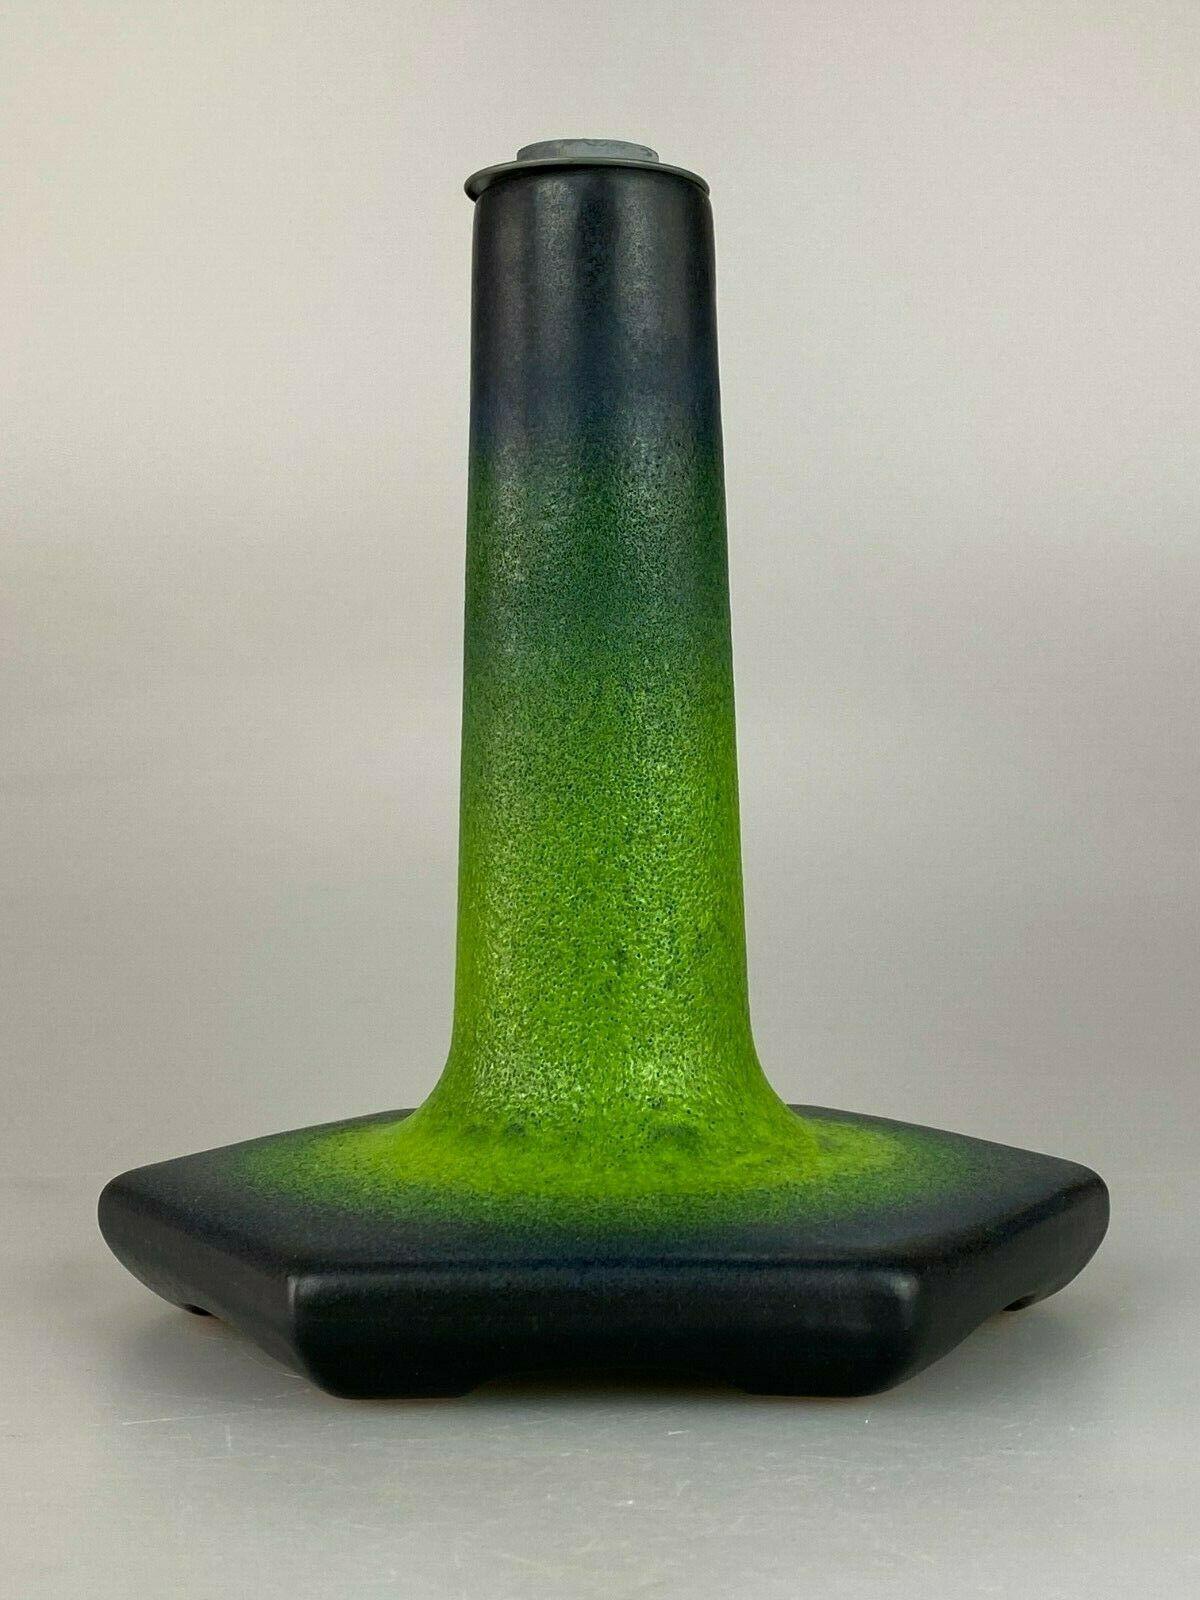 60s 70s lamp light wall lamp ceramic mid century space age 60s 70s

Object: wall lamp

Manufacturer:

Condition: good

Age: around 1960-1970

Dimensions:

Diameter = 18.5cm
Height = 20cm

Other notes:

The pictures serve as part of